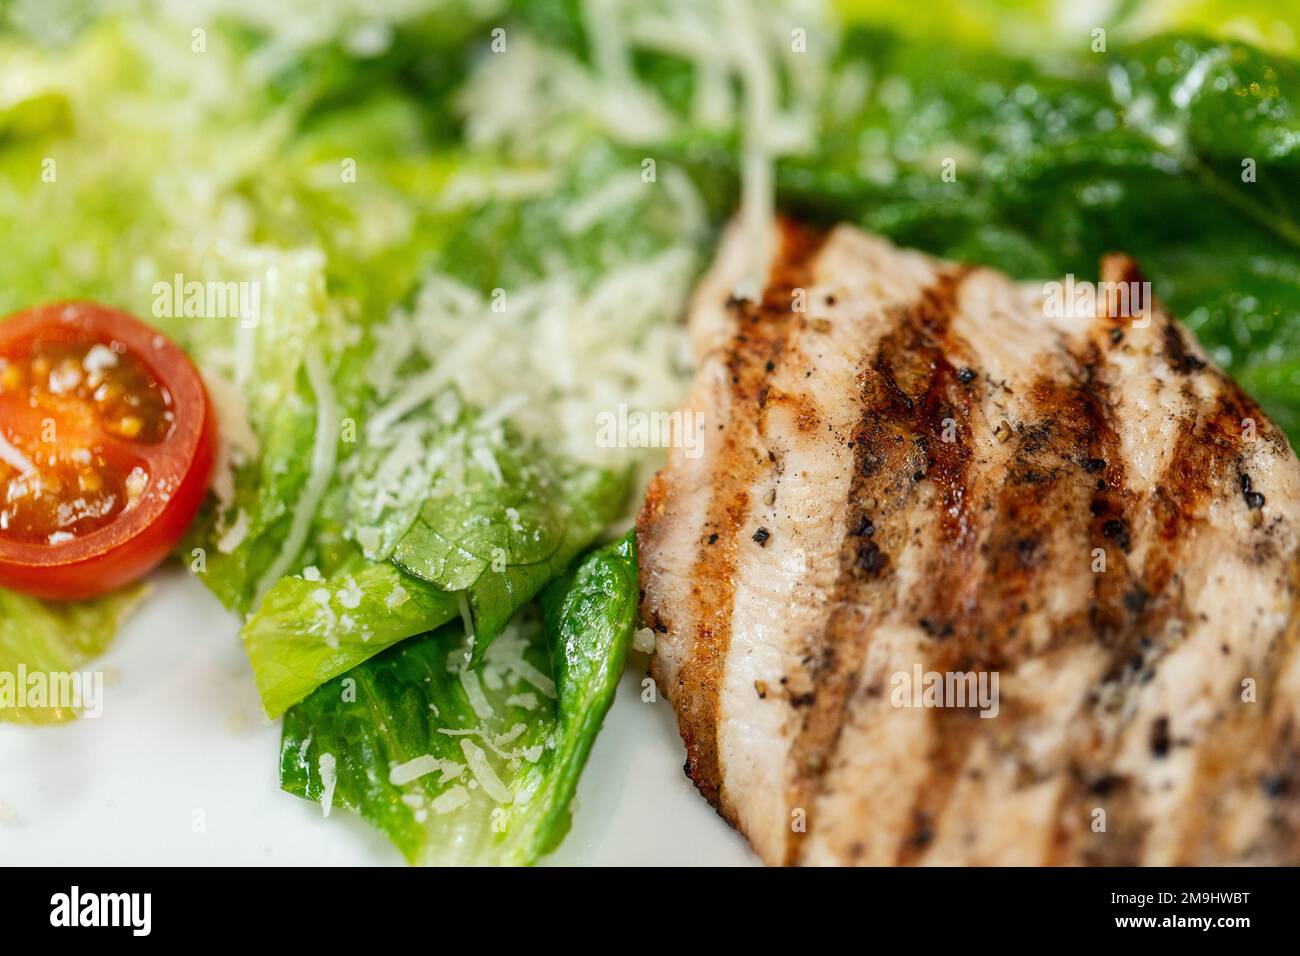 close up of chicken with vegetable salad on plate Stock Photo